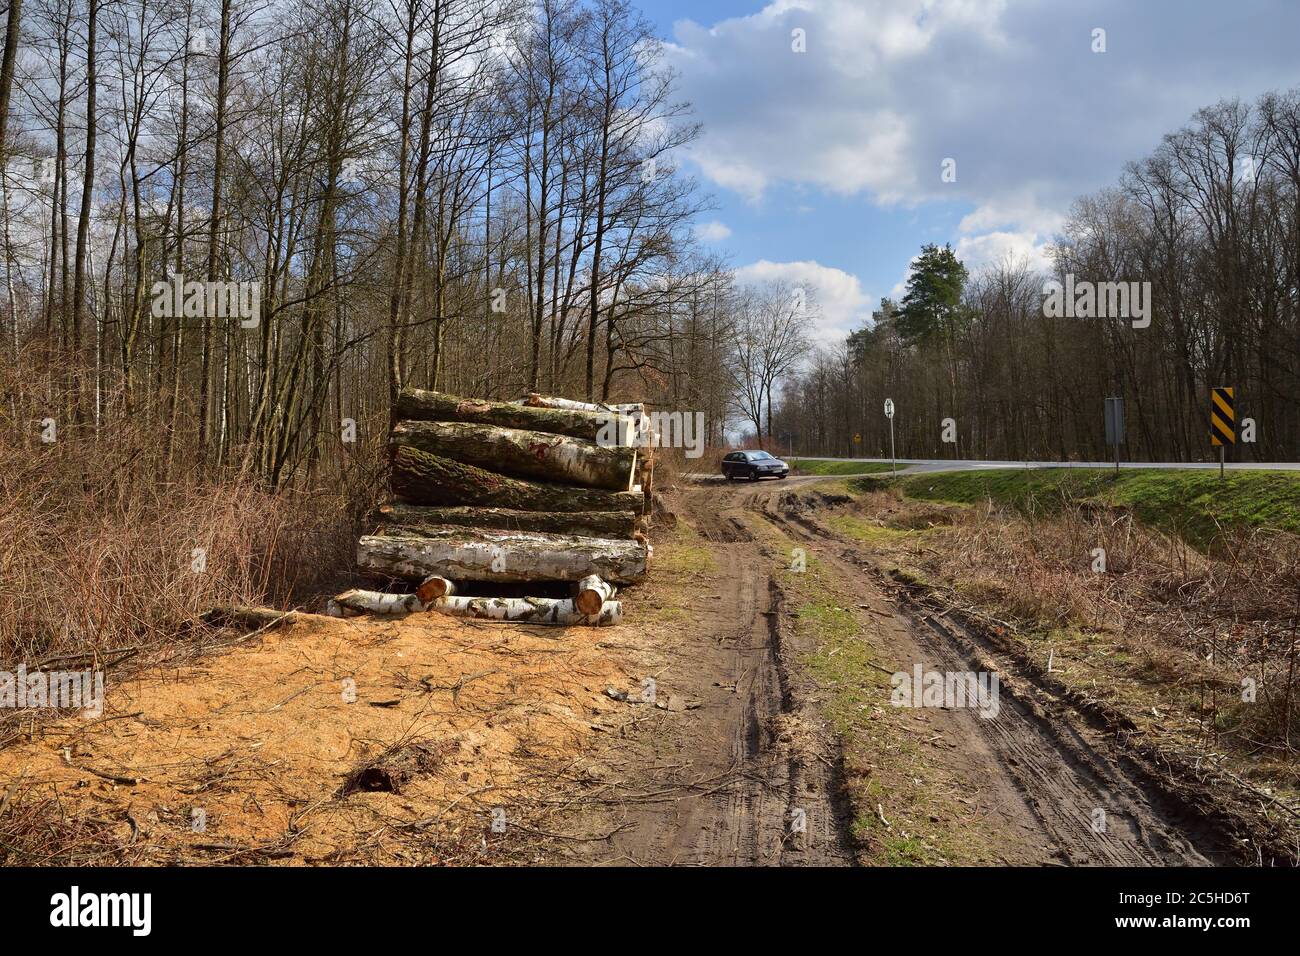 Tree trunks cut and stacked arranged and prepared for removal from the forest to industry. Stock Photo